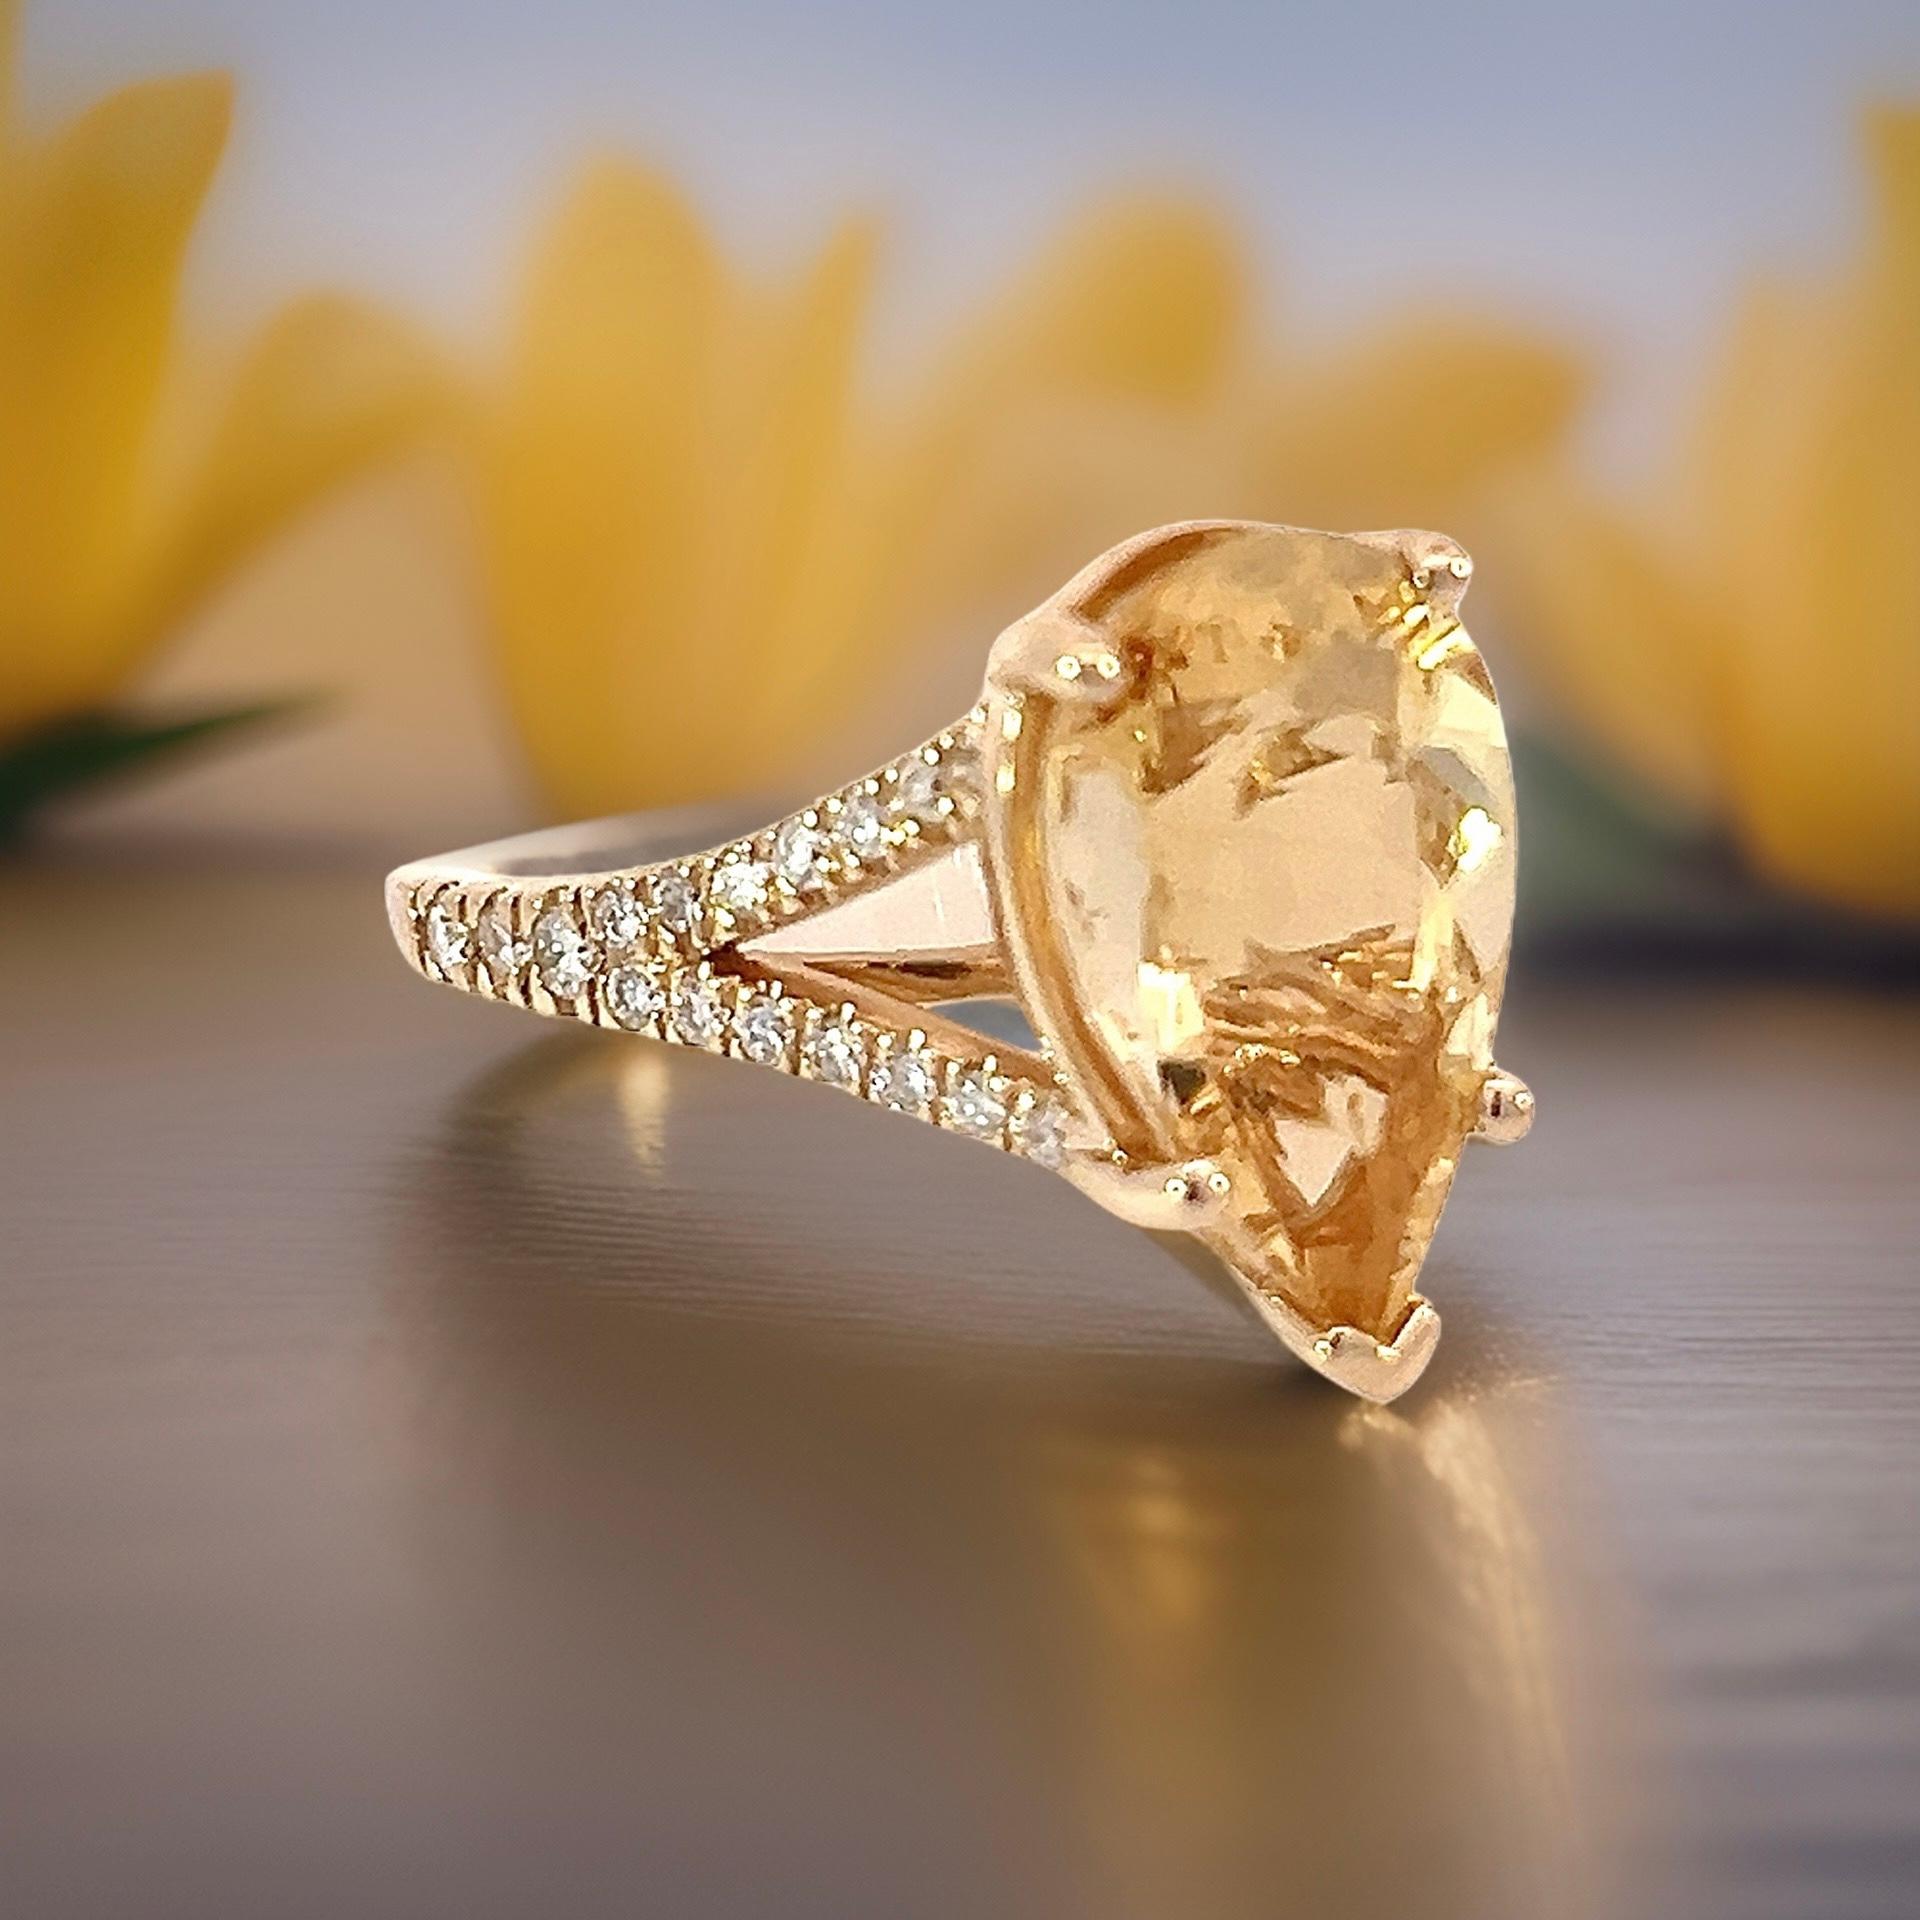 Natural Citrine Diamond Ring 6.5 14k Y Gold 4.79 TCW Certified $3,950 310632

This is a Unique Custom Made Glamorous Piece of Jewelry!

Nothing says, “I Love you” more than Diamonds and Pearls!

This Citrine ring has been Certified, Inspected, and